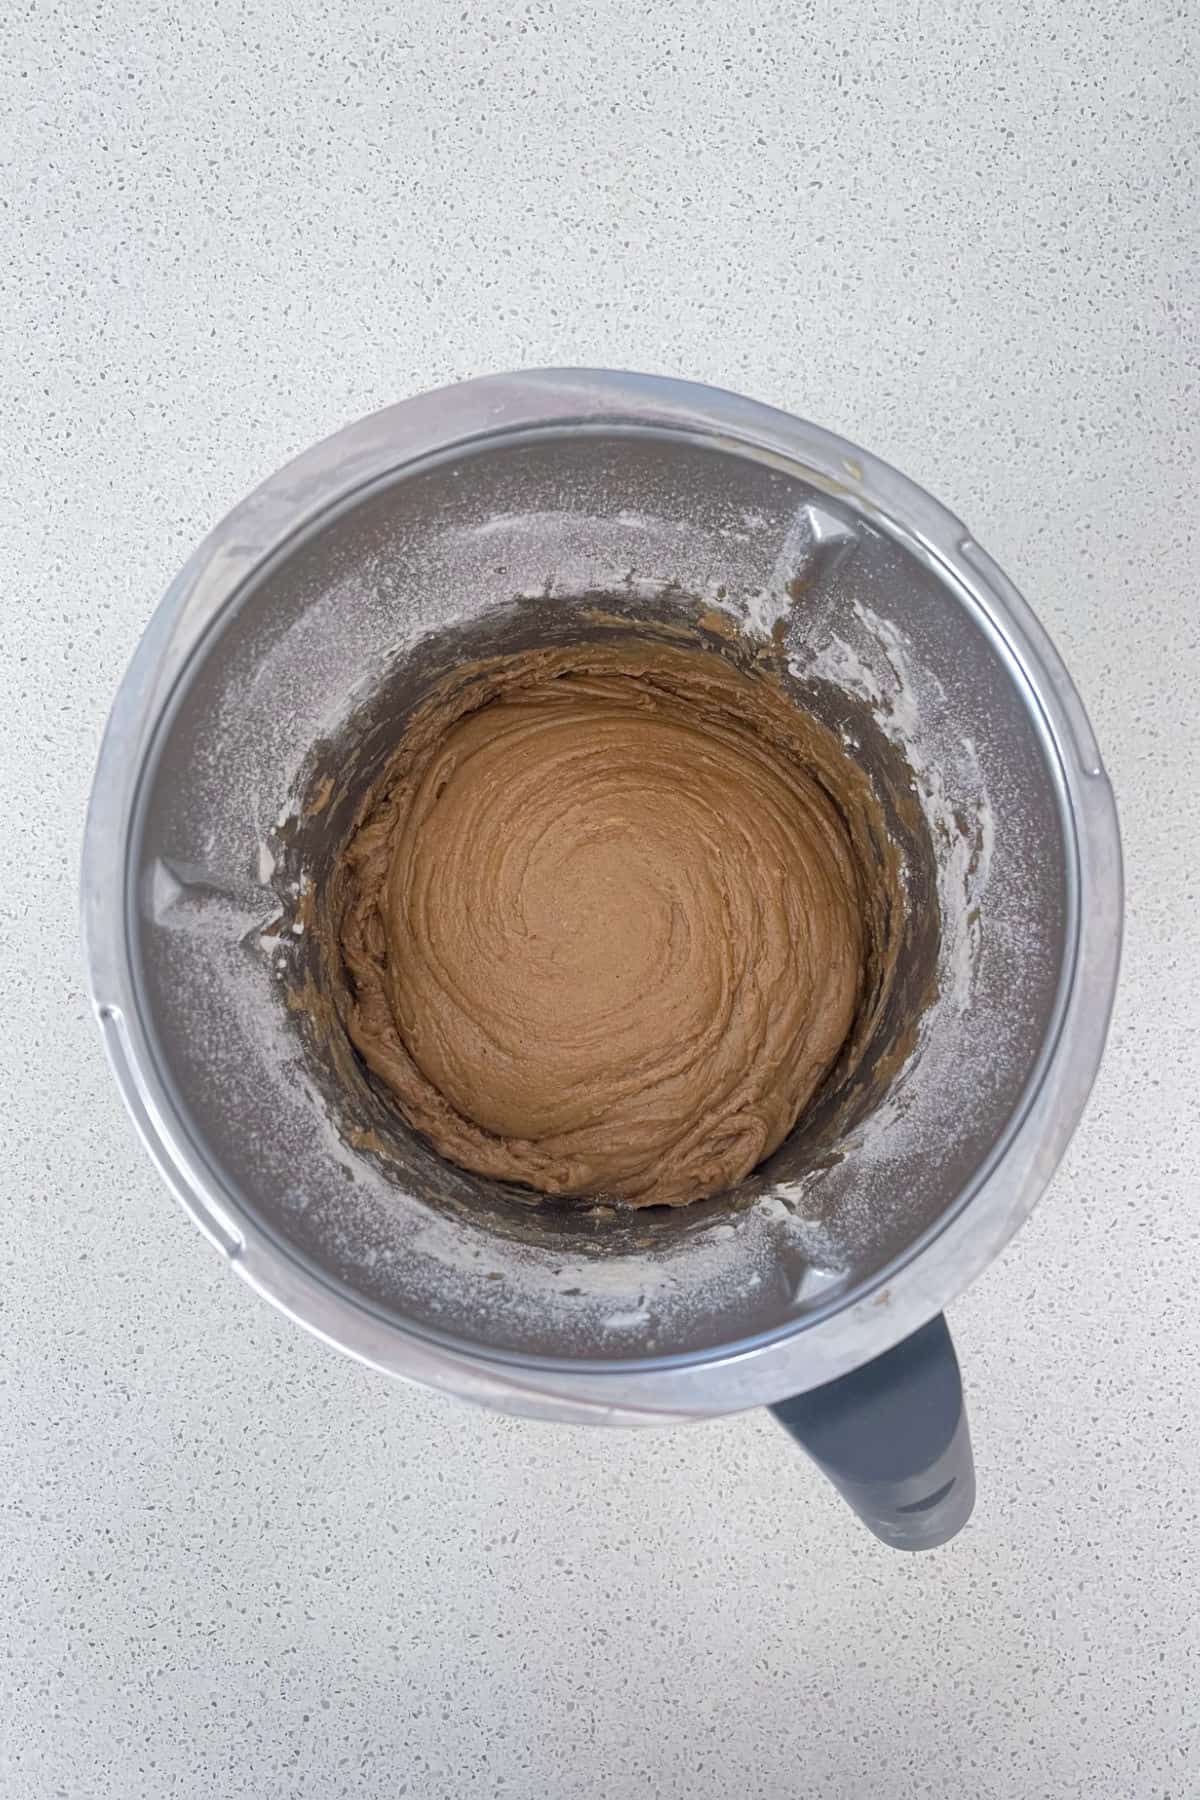 Gingerbread dough mixed together in a thermomix bowl.